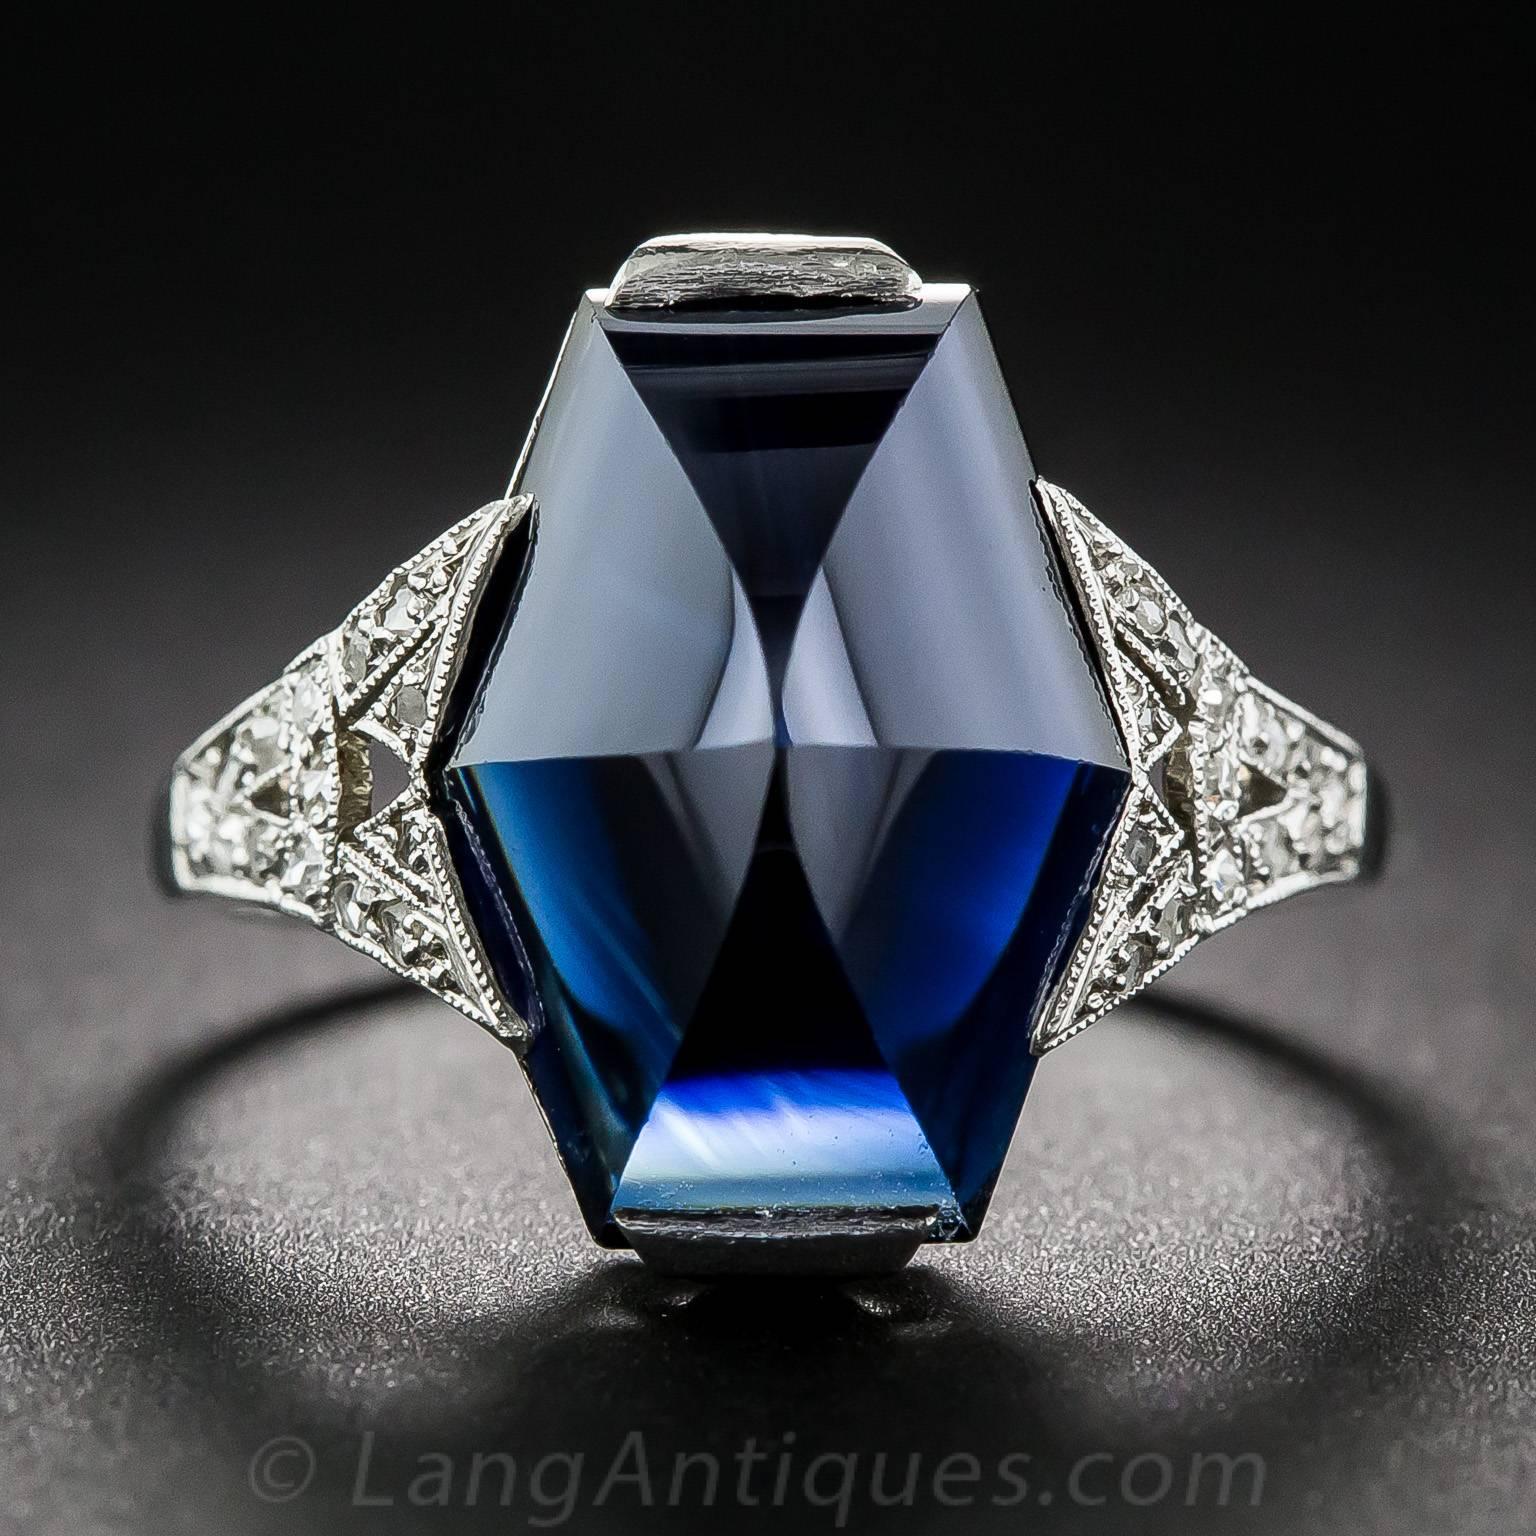 This striking French made ring, circa 1925, features a very special gemstone: a 7.25 carat sapphire fashioned into a faceted hexagonal buff-top cut. The dark midnight blue gemstone is presented in a gorgeous mounting, hand crafted in platinum with